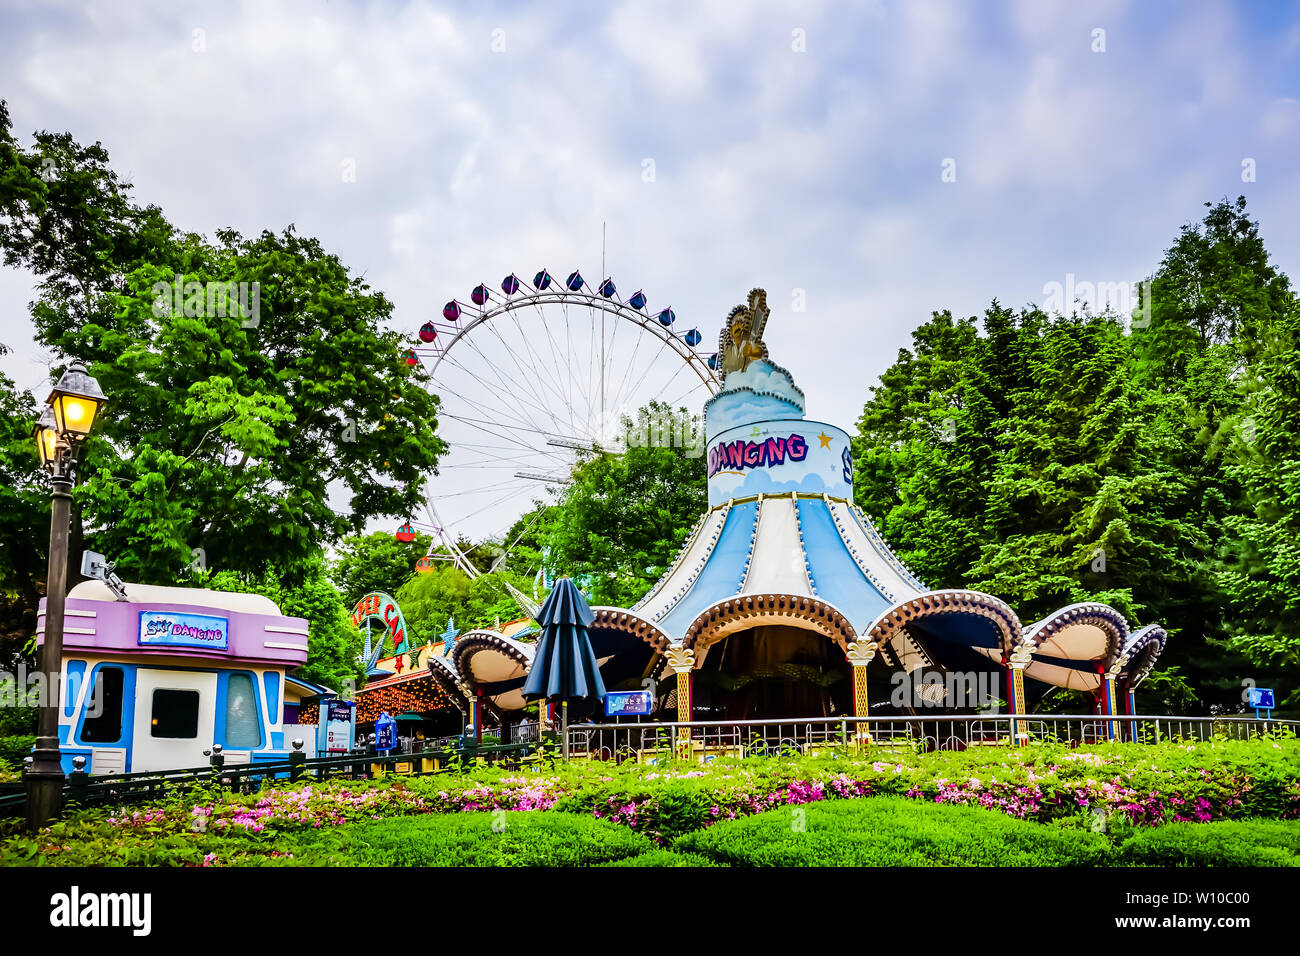 Seoul, South Korea - May 16, 2017: Magical world of adventures and excitement at Everland Resort, Yongin, South Korea. Stock Photo